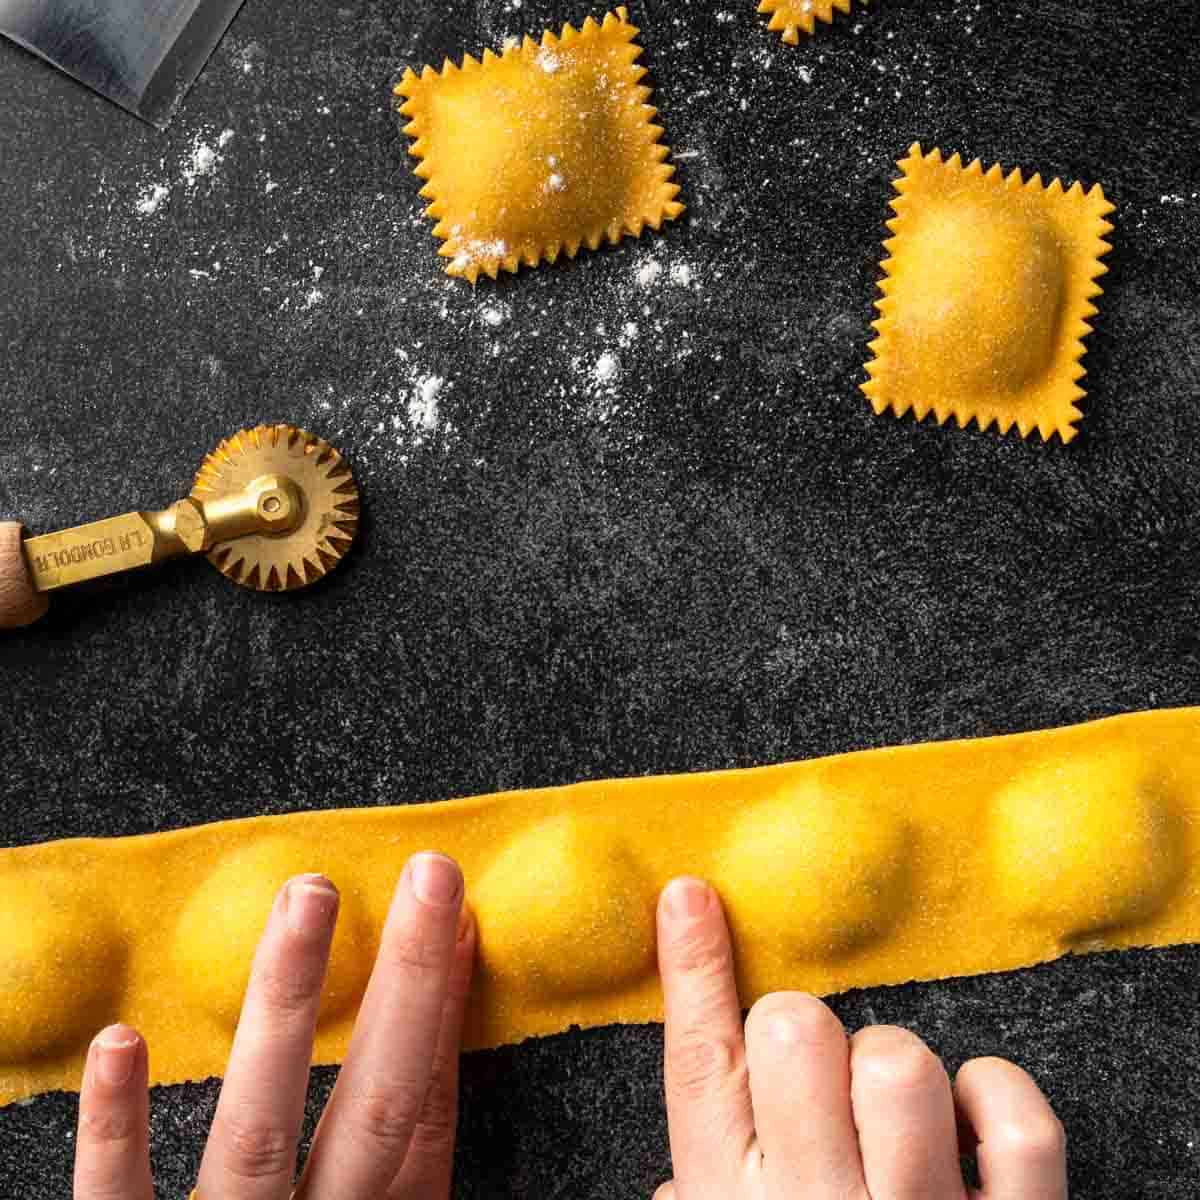 A row of ravioli being sealed by my fingertips before cutting into individual ravioli.